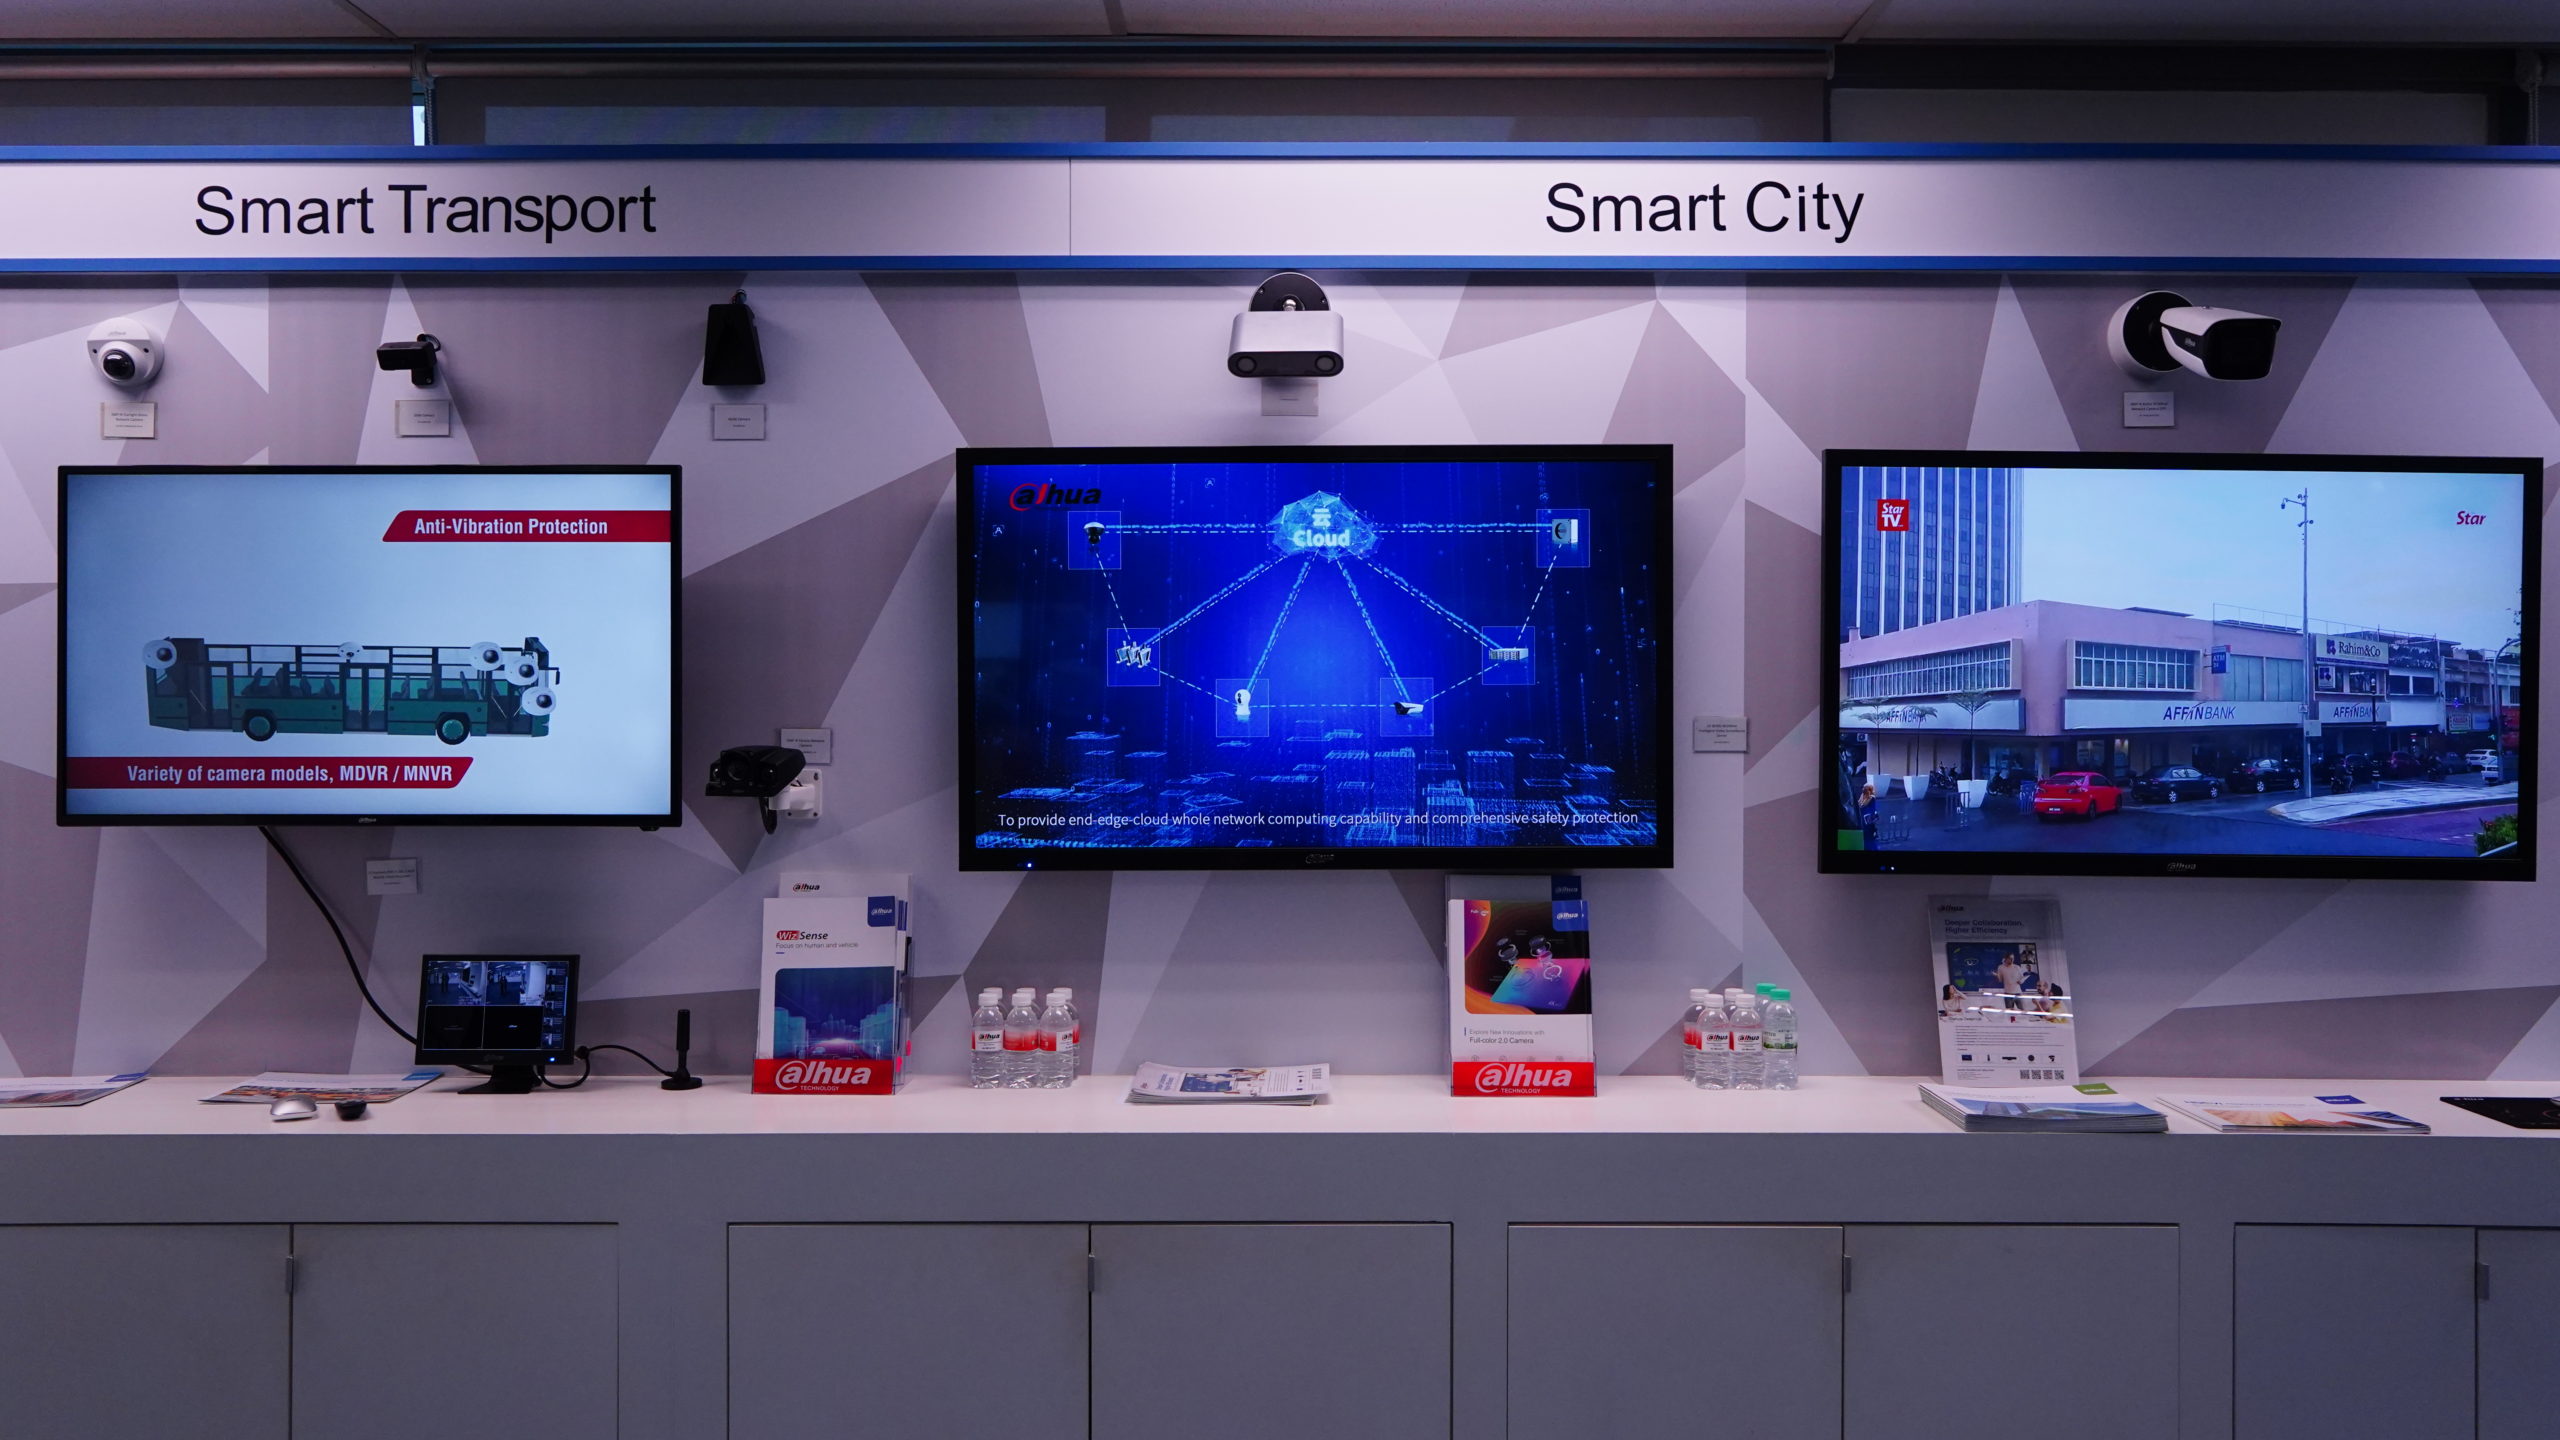 The exhibition hall showcases smart solutions for cities and transportation, leading the development of Malaysia's security industry.